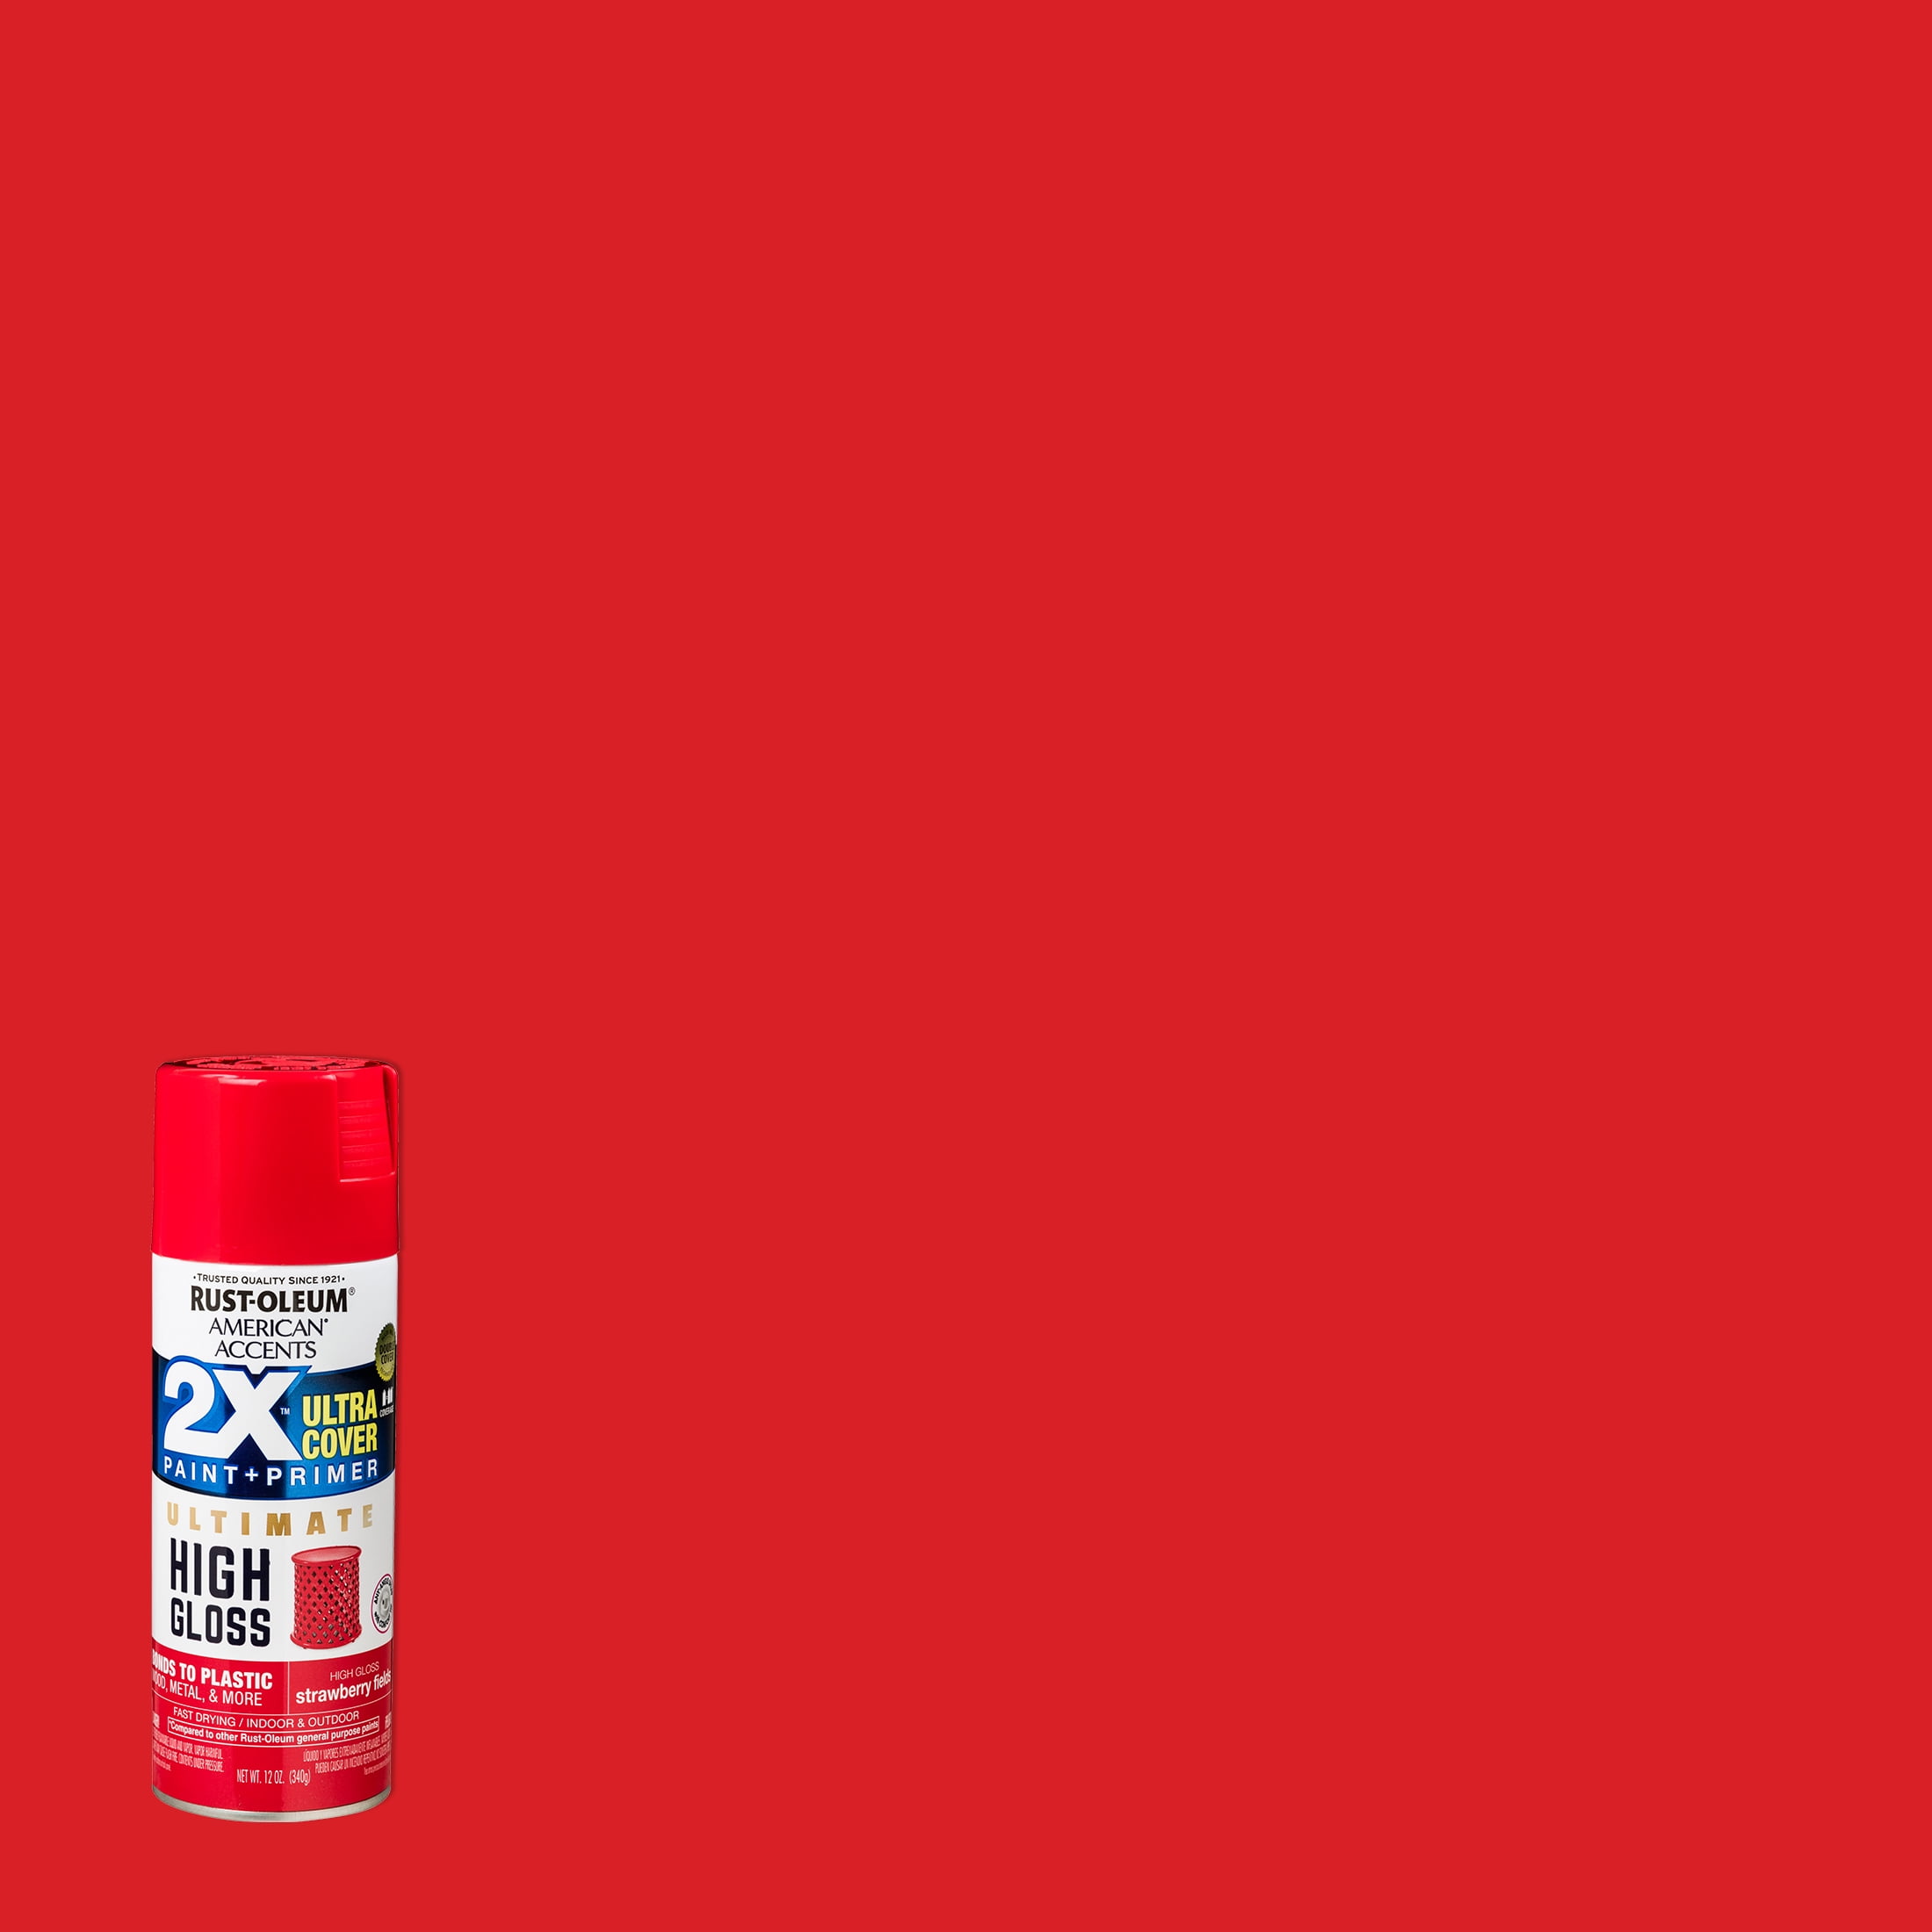 Latte, Rust-Oleum American Accents 2x Ultra Cover Gloss Spray Paint-383198, 12 oz